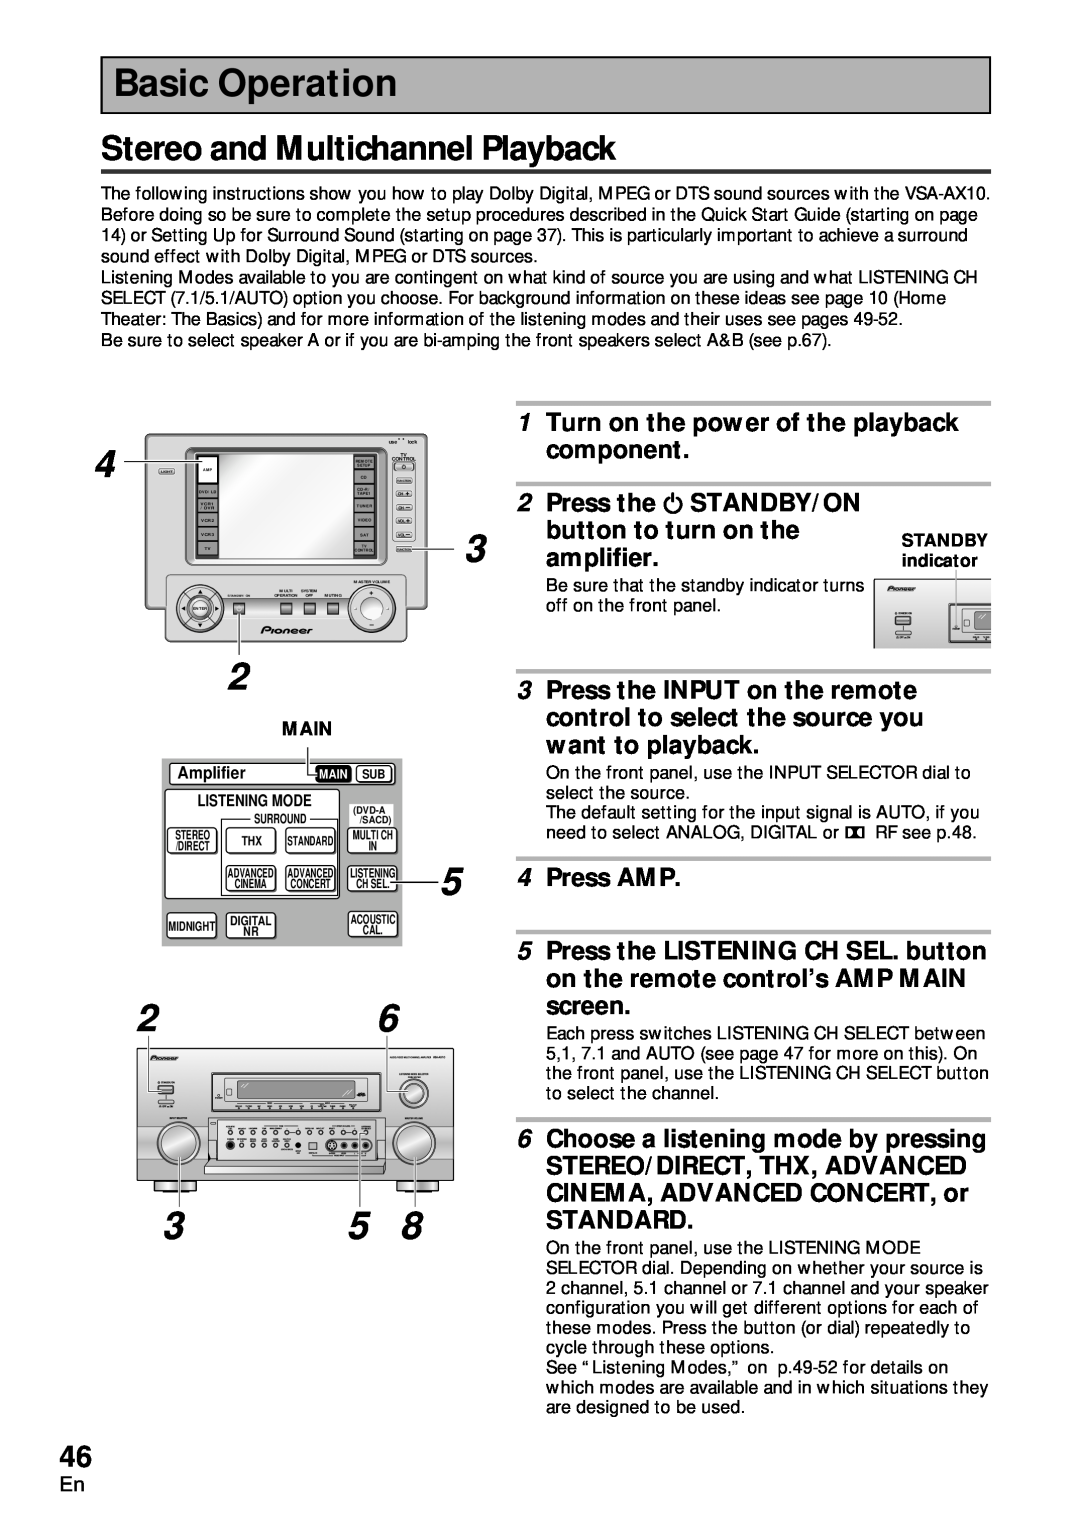 Pioneer VSA-AX10 Basic Operation, Stereo and Multichannel Playback, 1Turn on the power of the playback, component, screen 